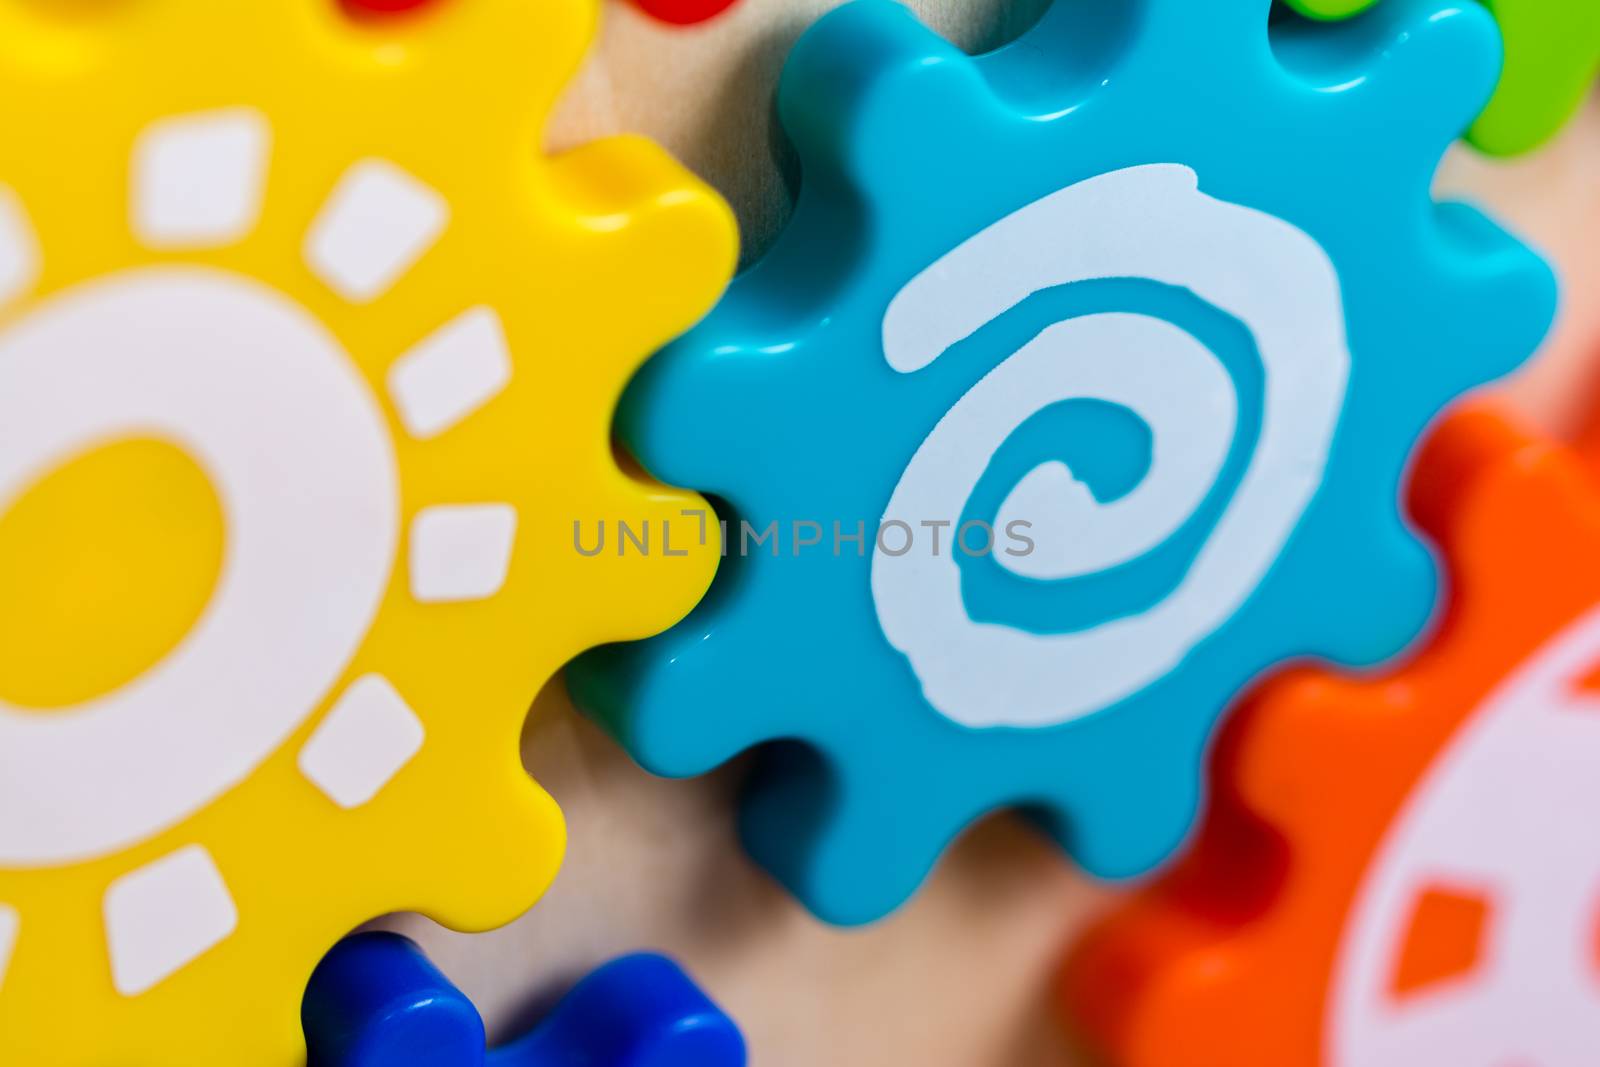 Colorful Gears by justtscott